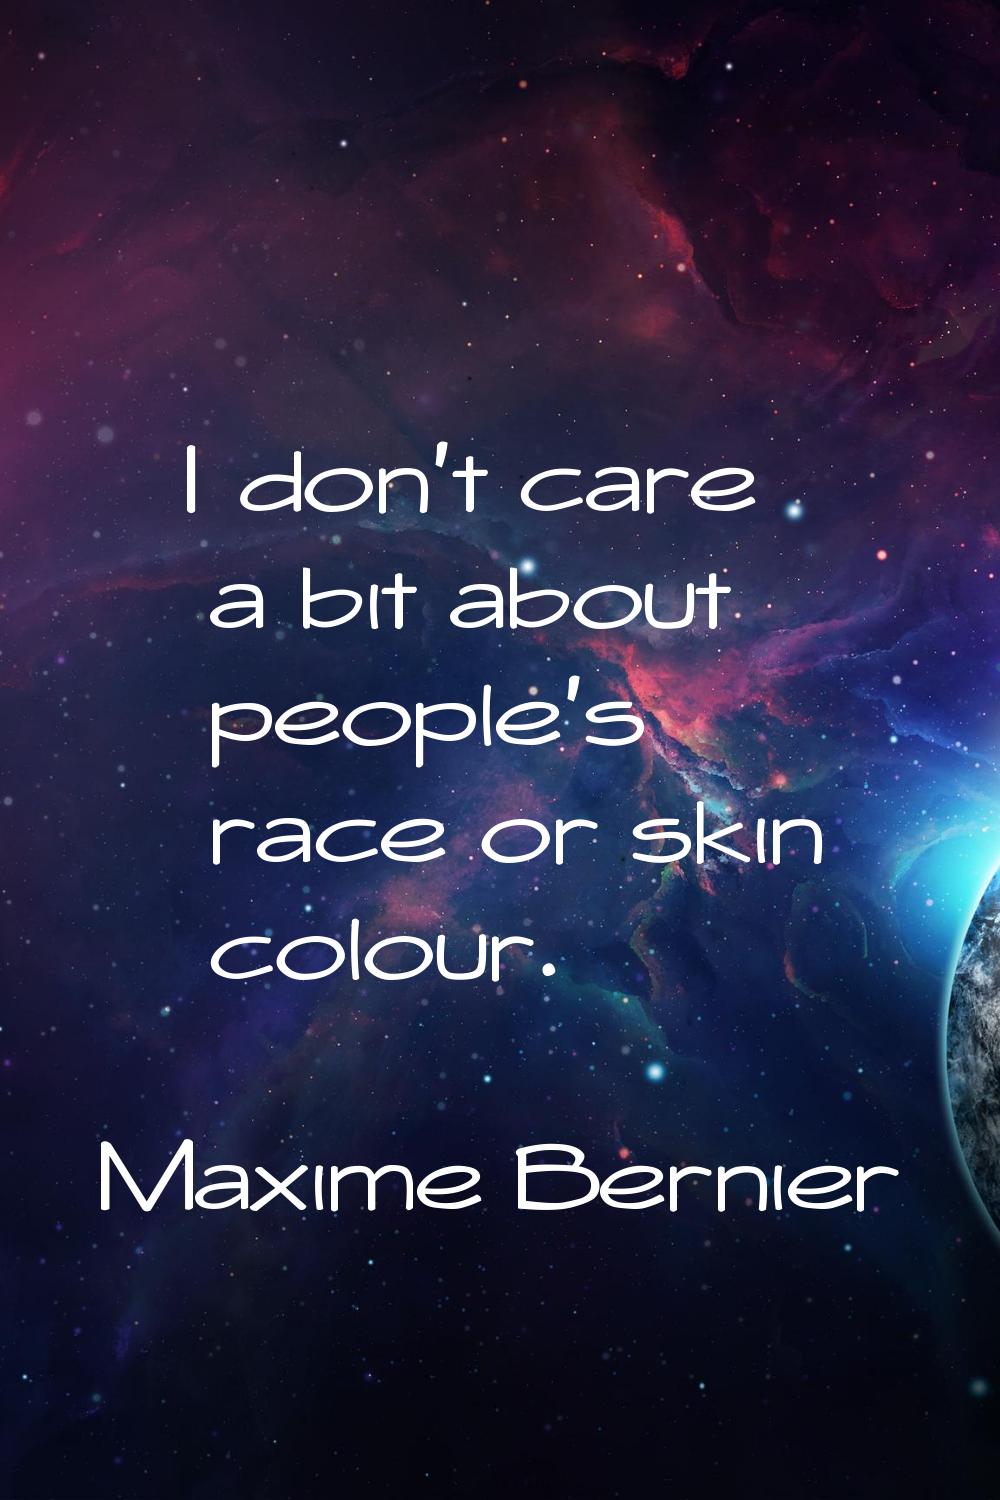 I don't care a bit about people's race or skin colour.